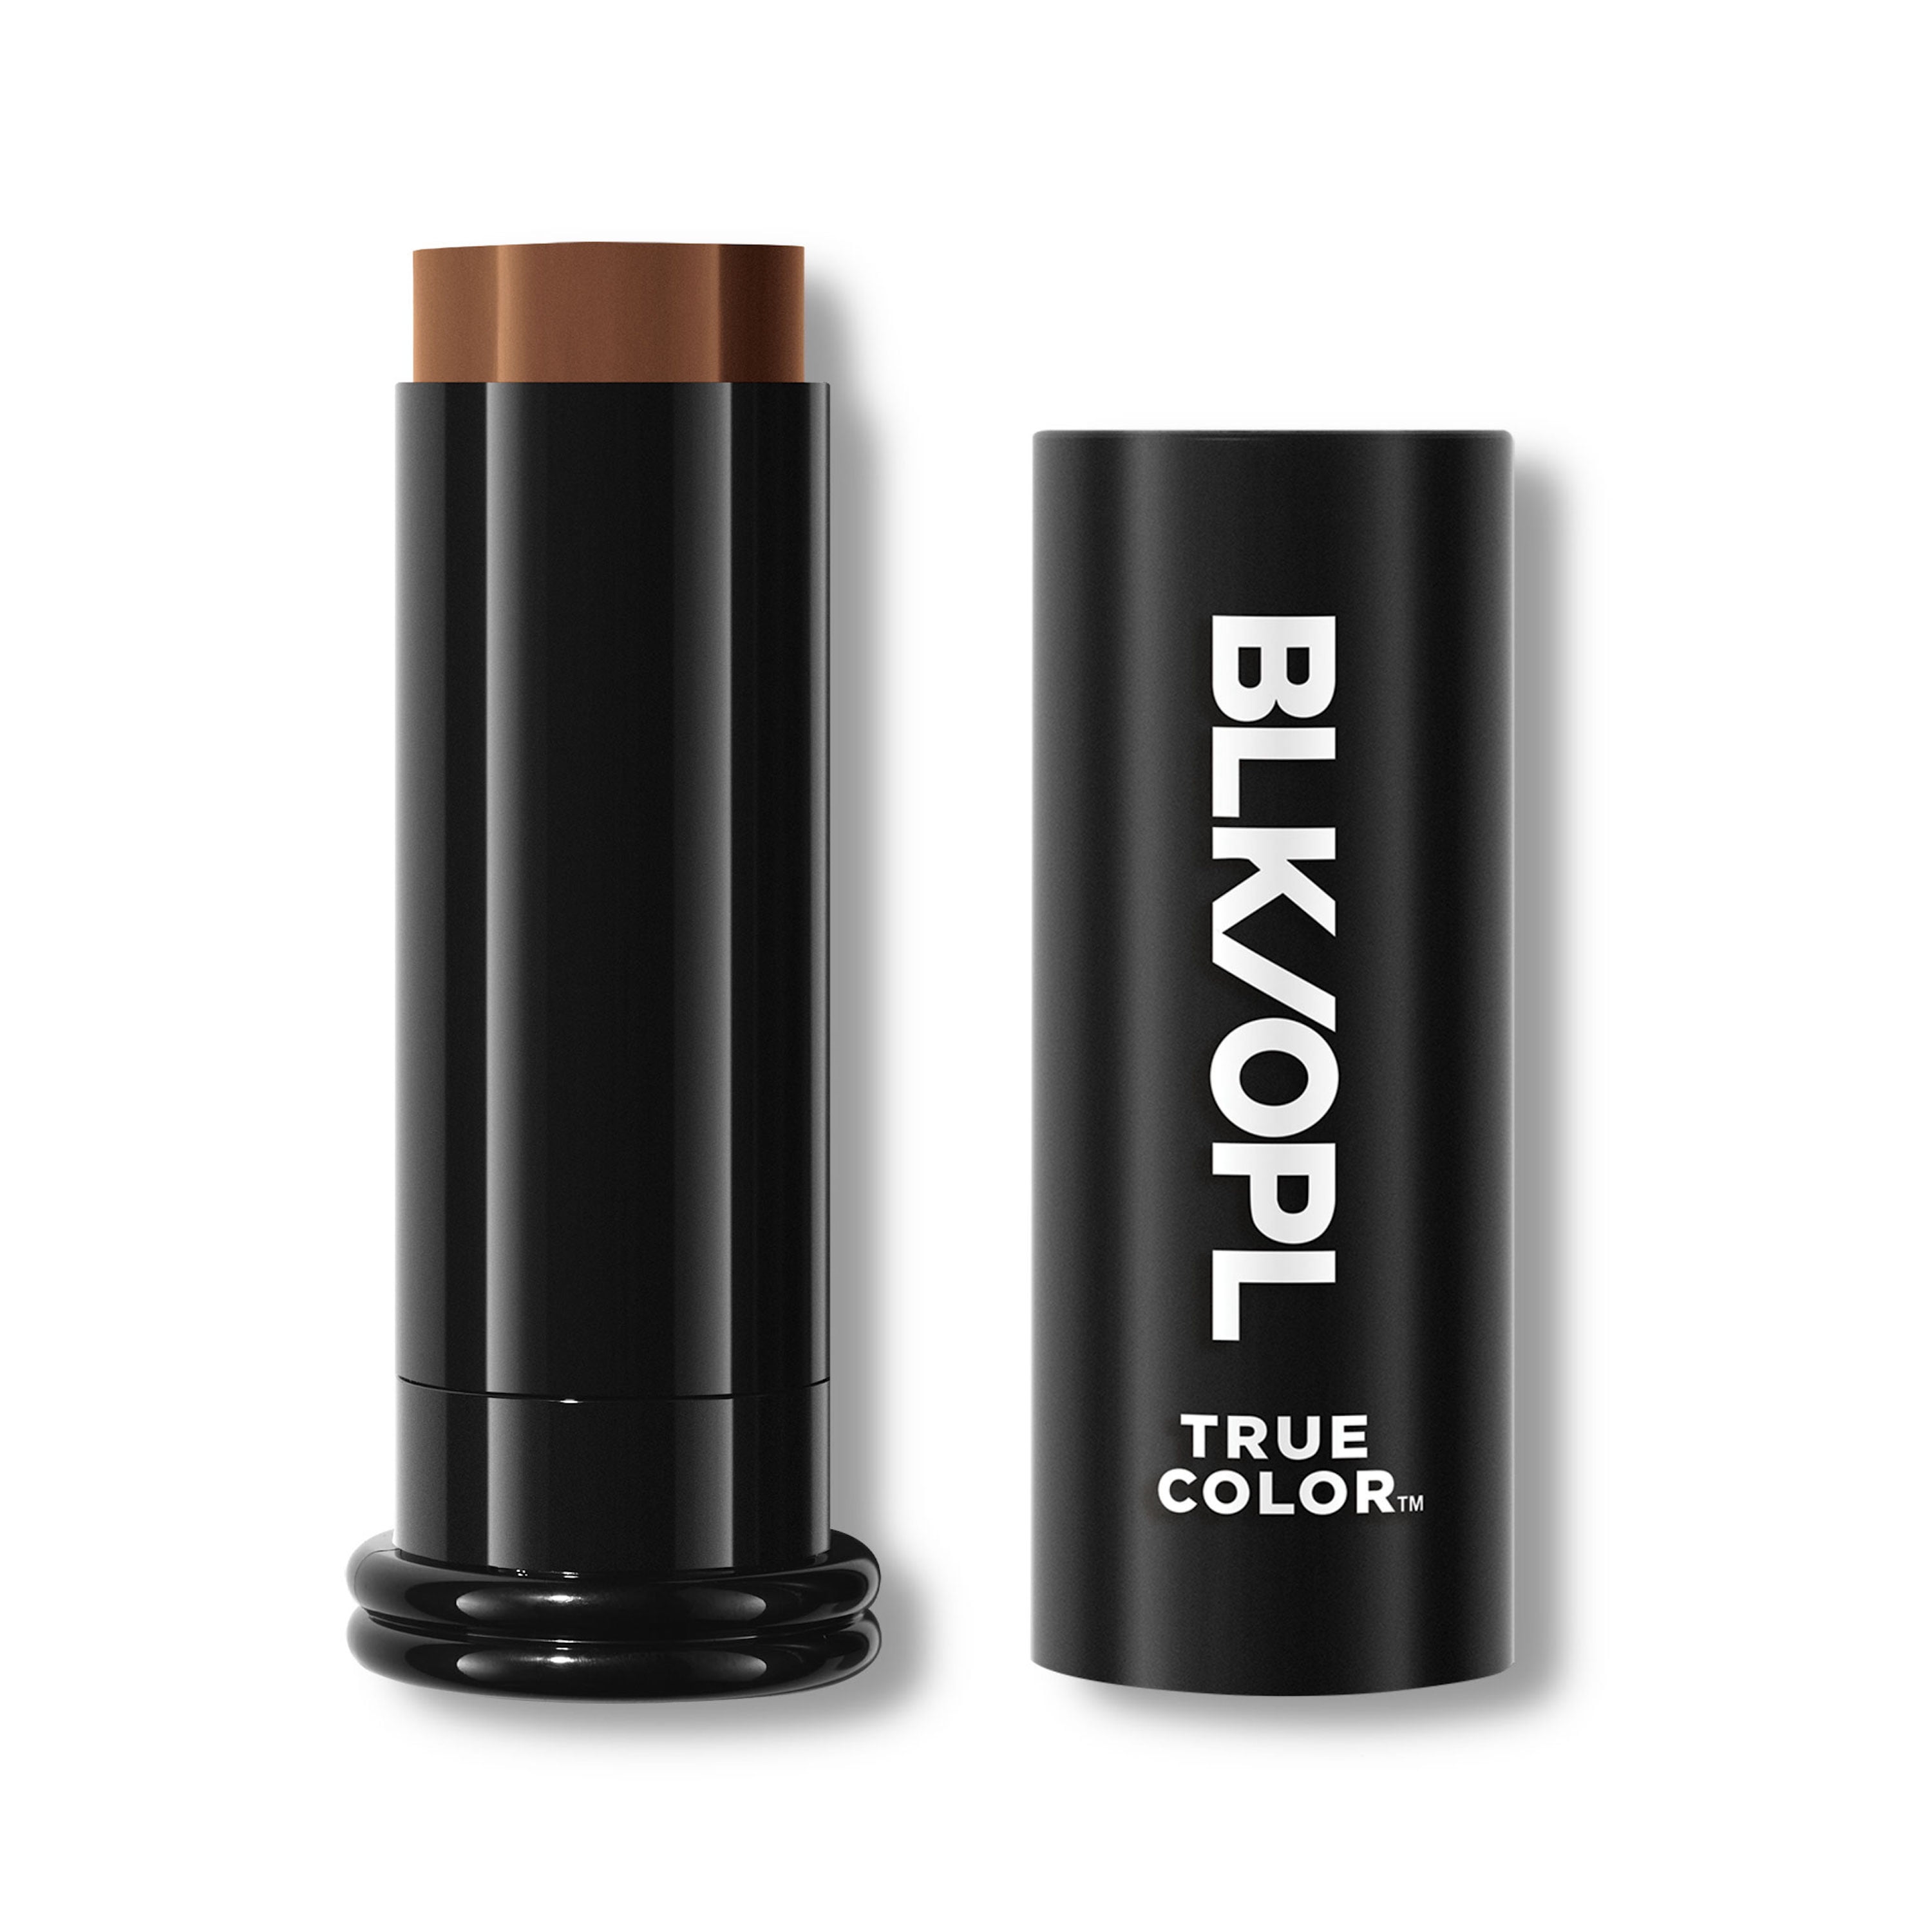 Black Opal Skin Perfecting Stick Foundation, SPF15, Hypoallergenic, Sweet Expresso